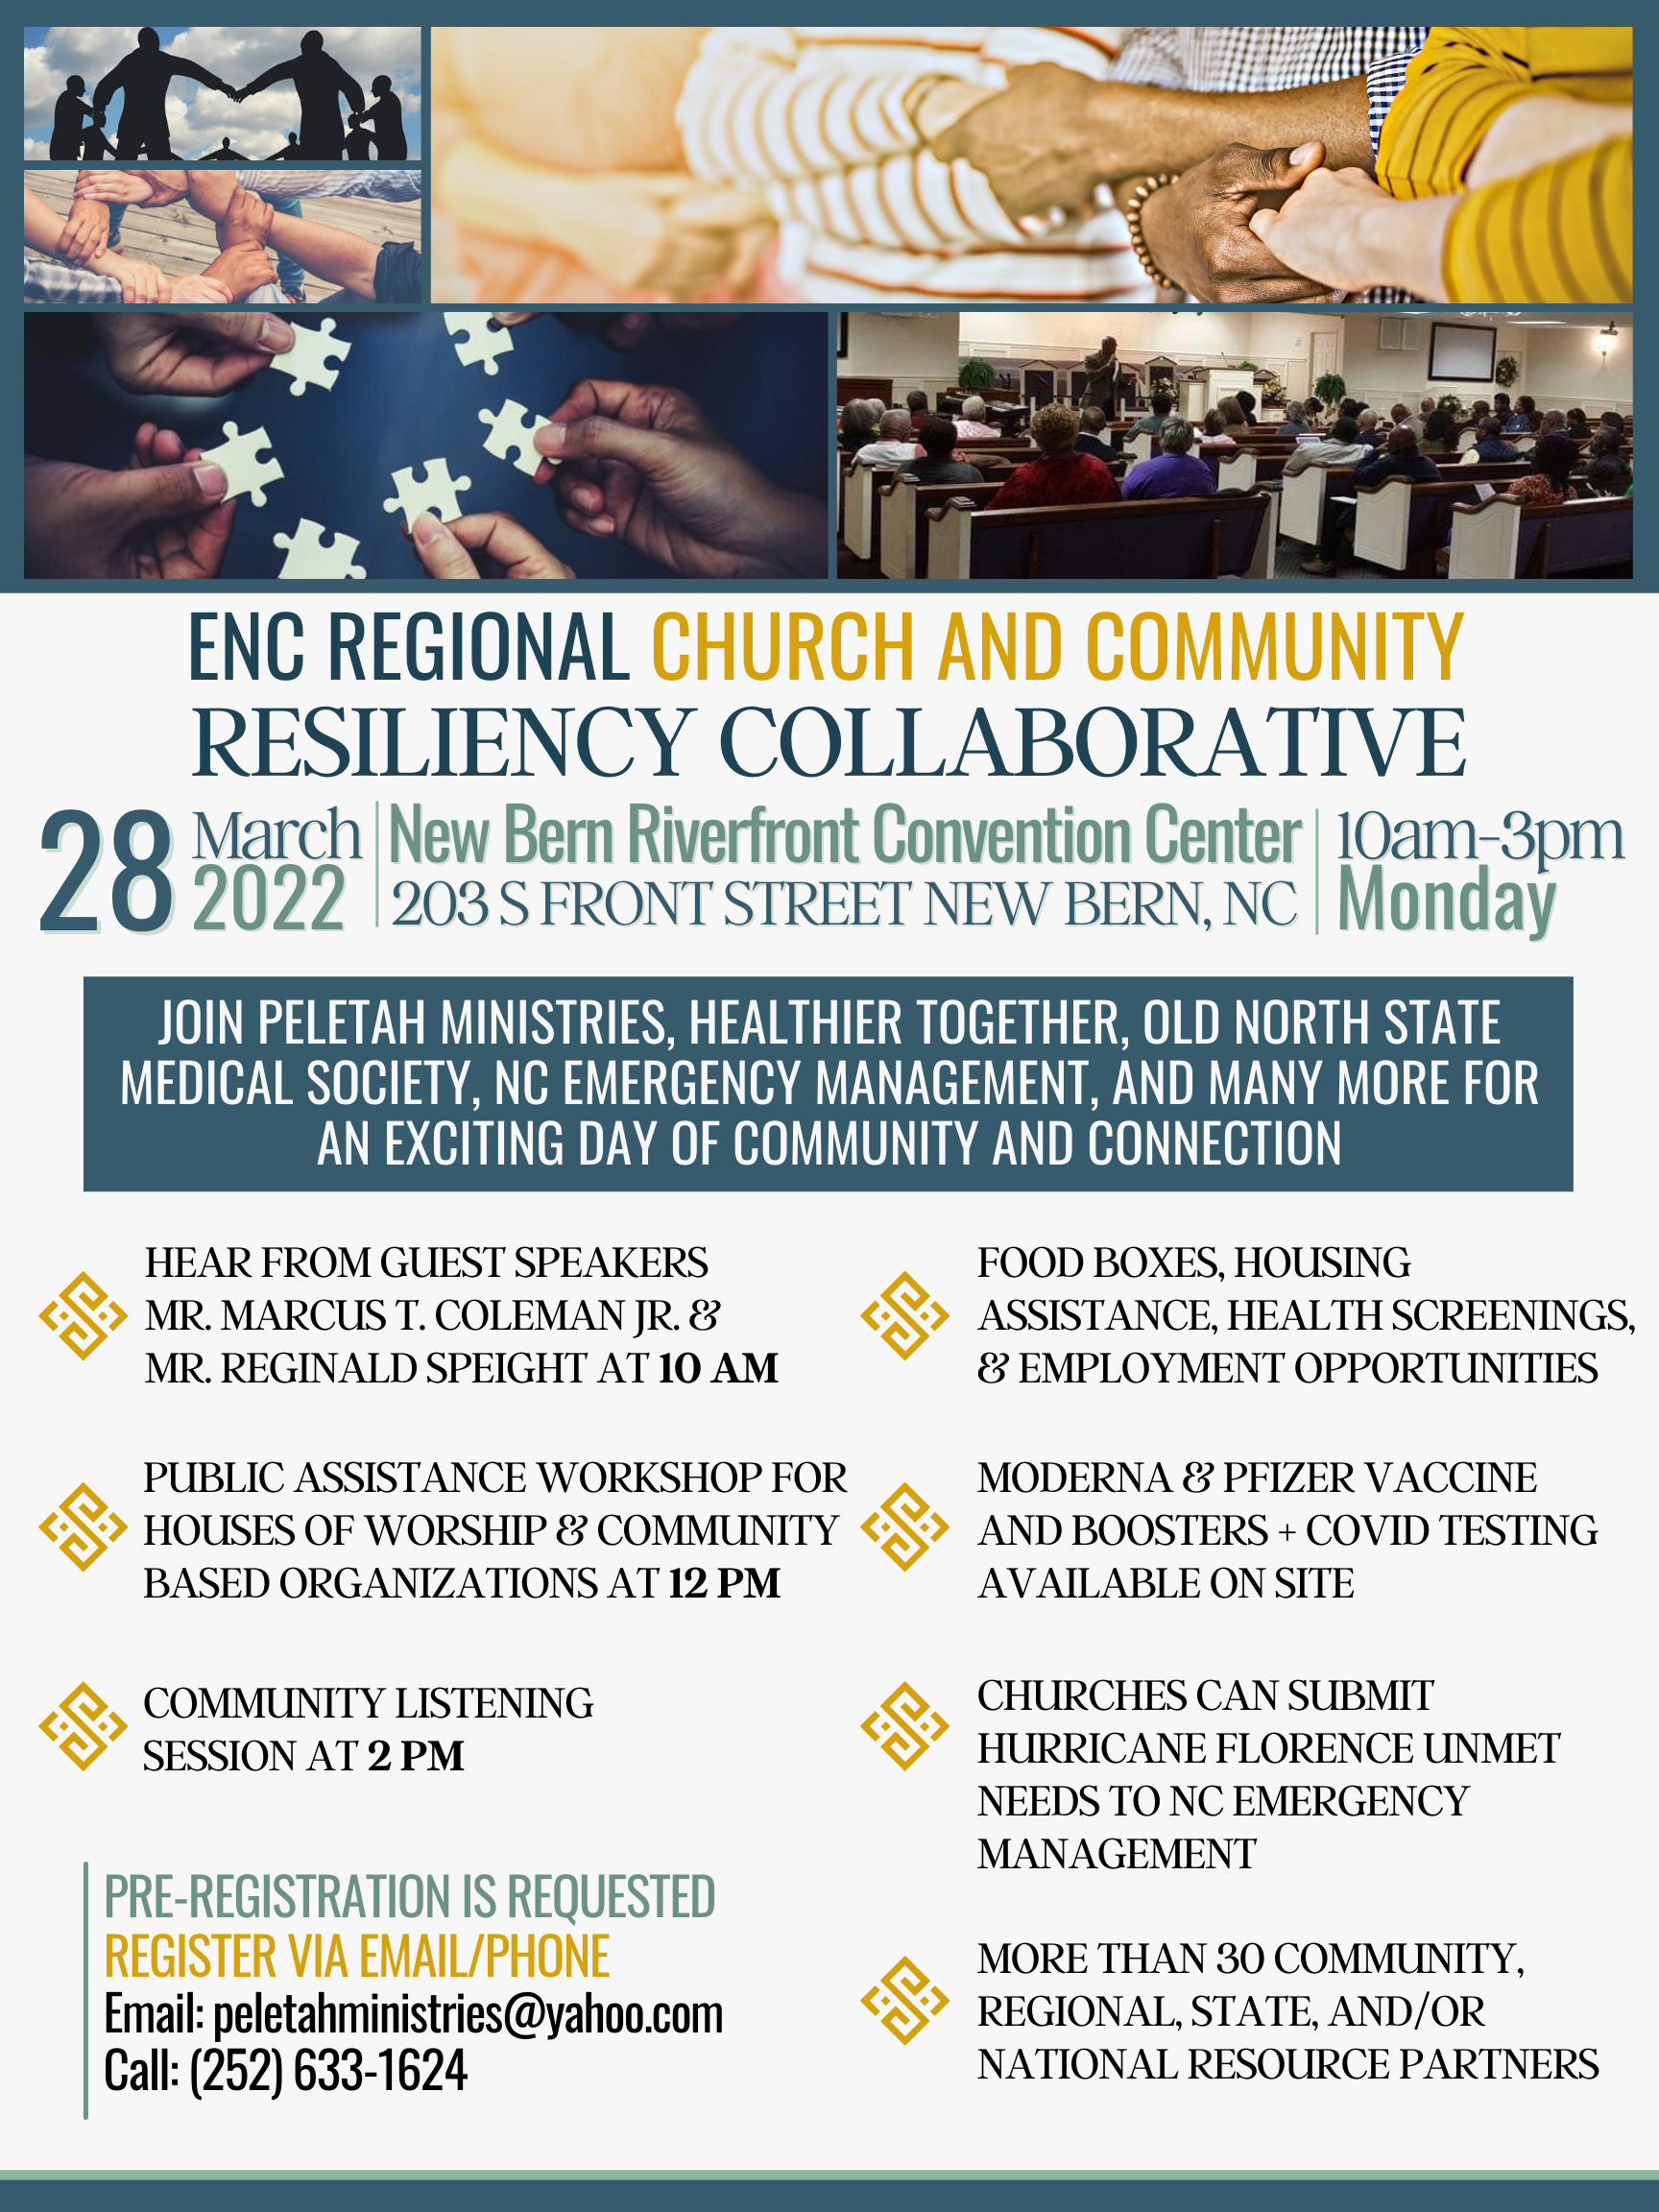 ENC Regional Church and Community Resiliency Collaborative- March 28, 2022